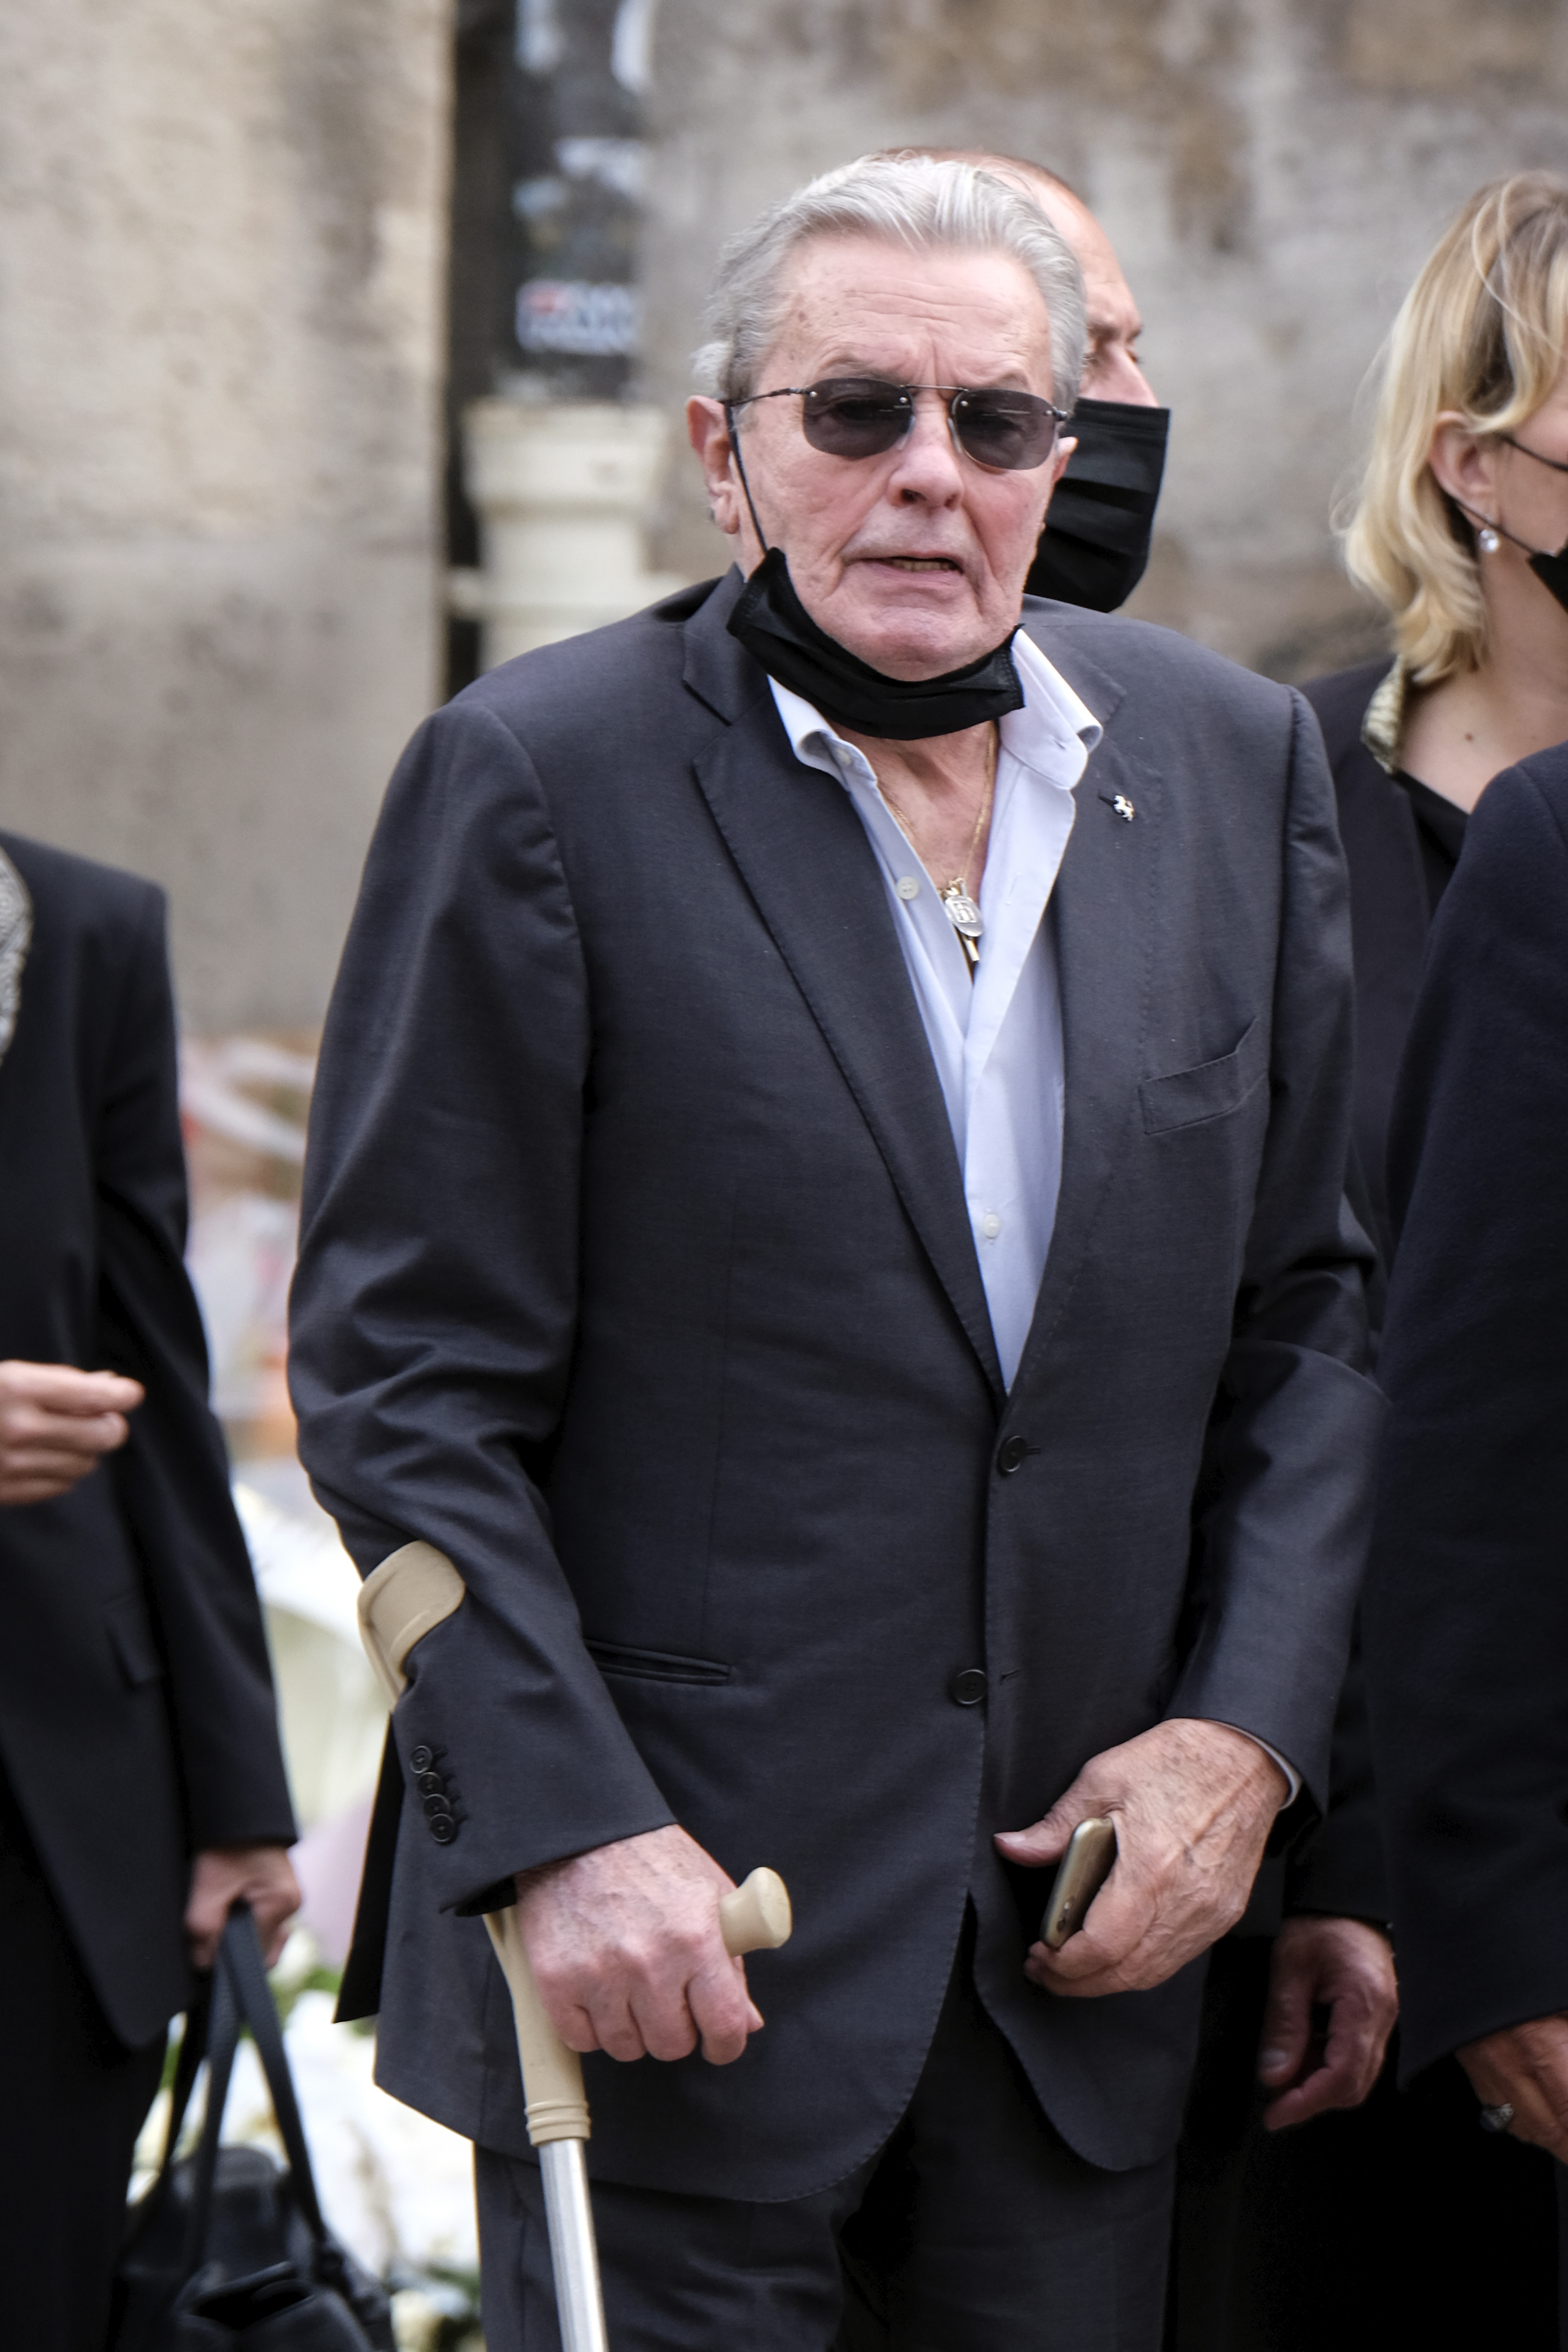 Alain Delon at Jean-Paul Belmondo's Funeral in Paris, France on September 10, 2021 | Source: Getty Images